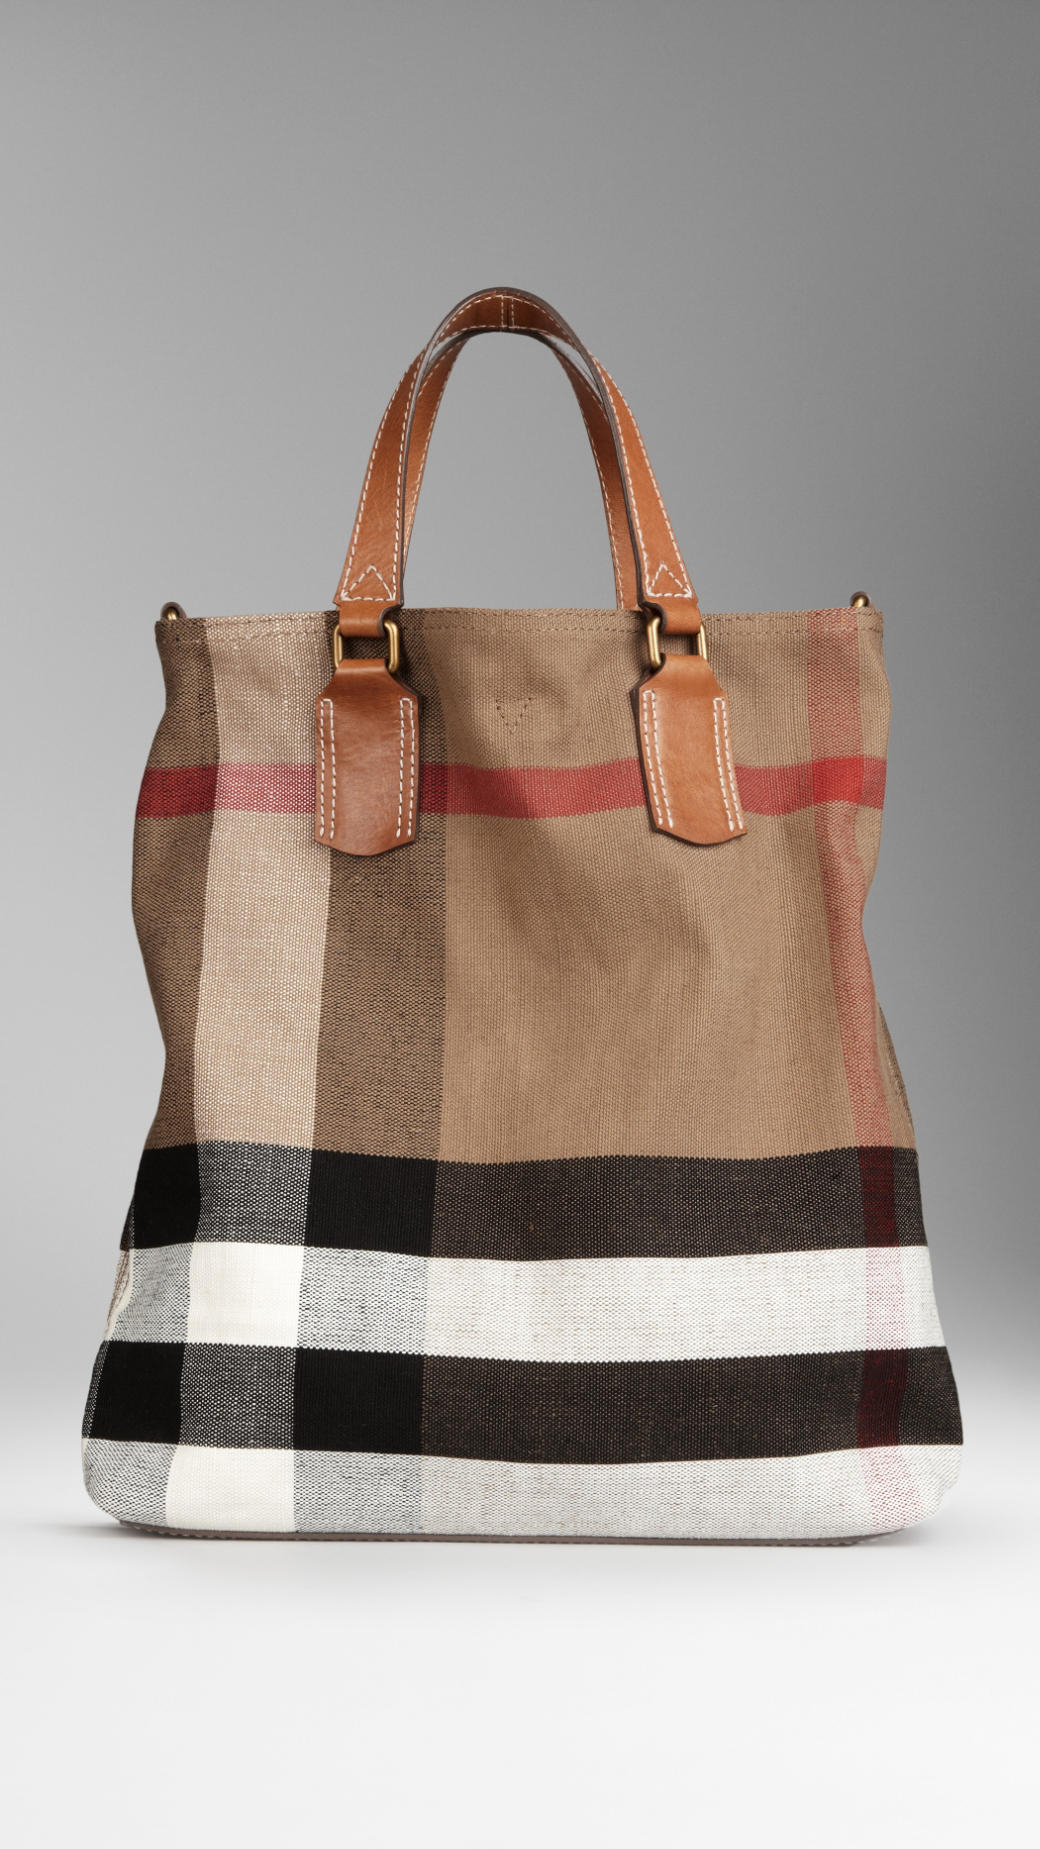 Burberry Medium Canvas Check Tote Bag in Brown